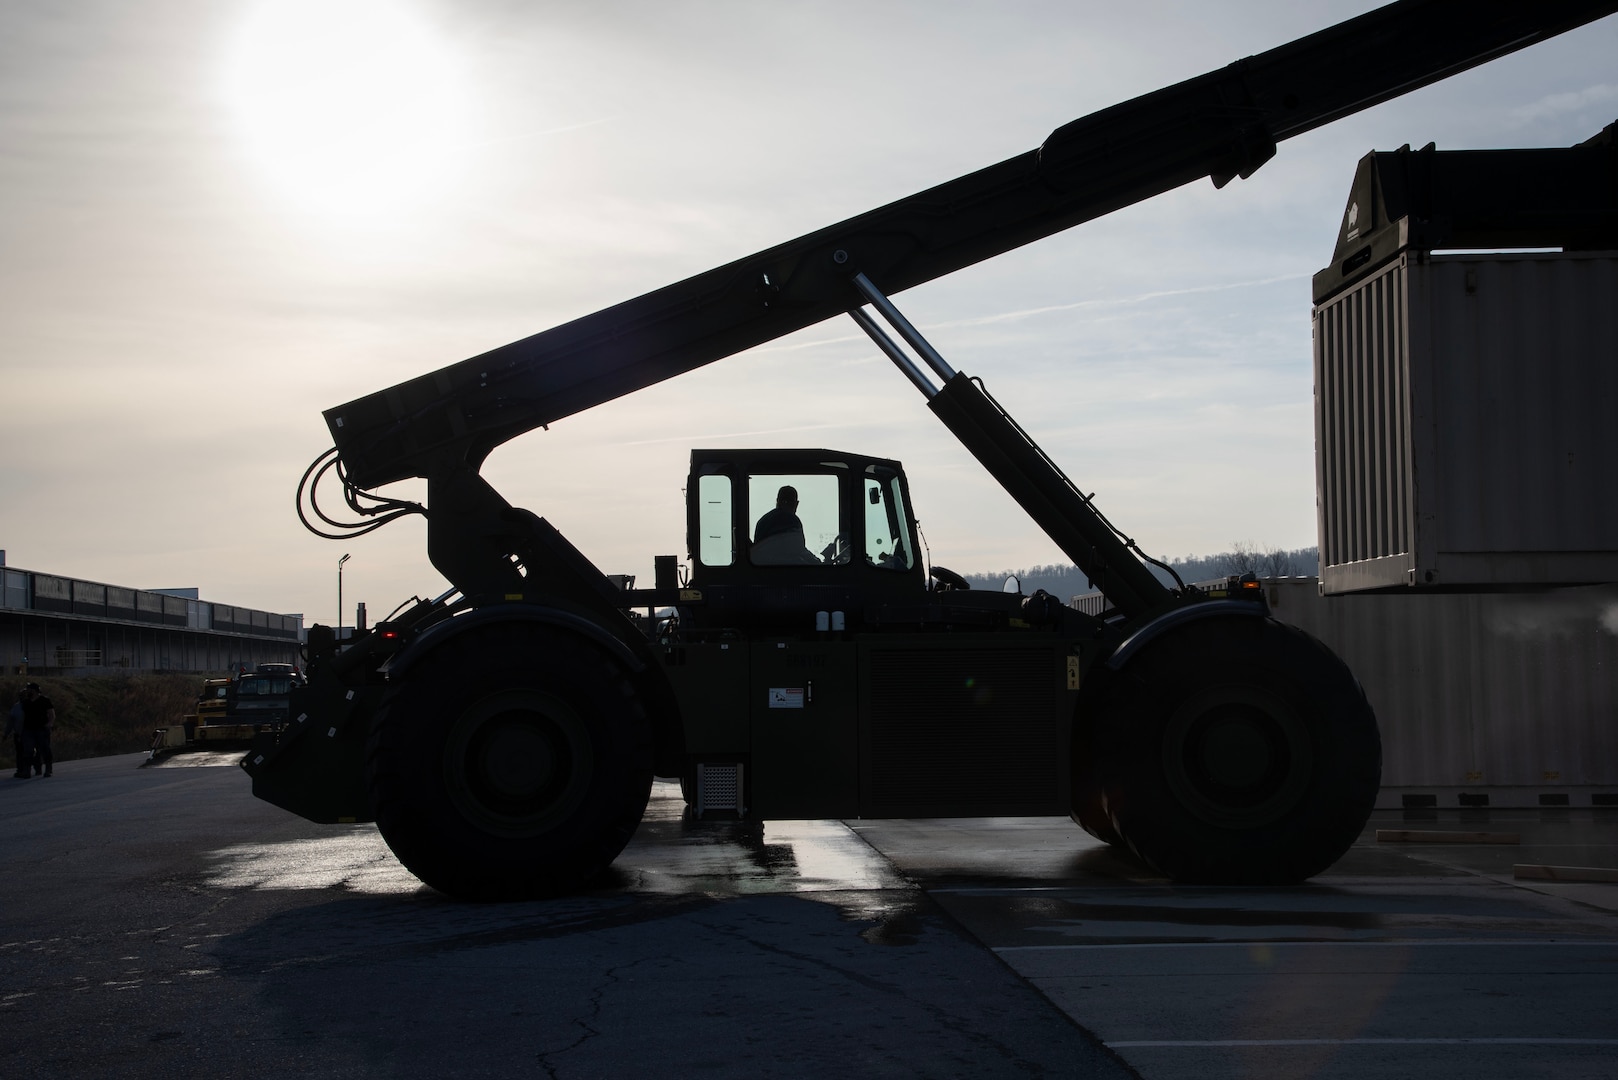 Man in the cab of heavy machinery, silhouetted against a cloudy morning sky.